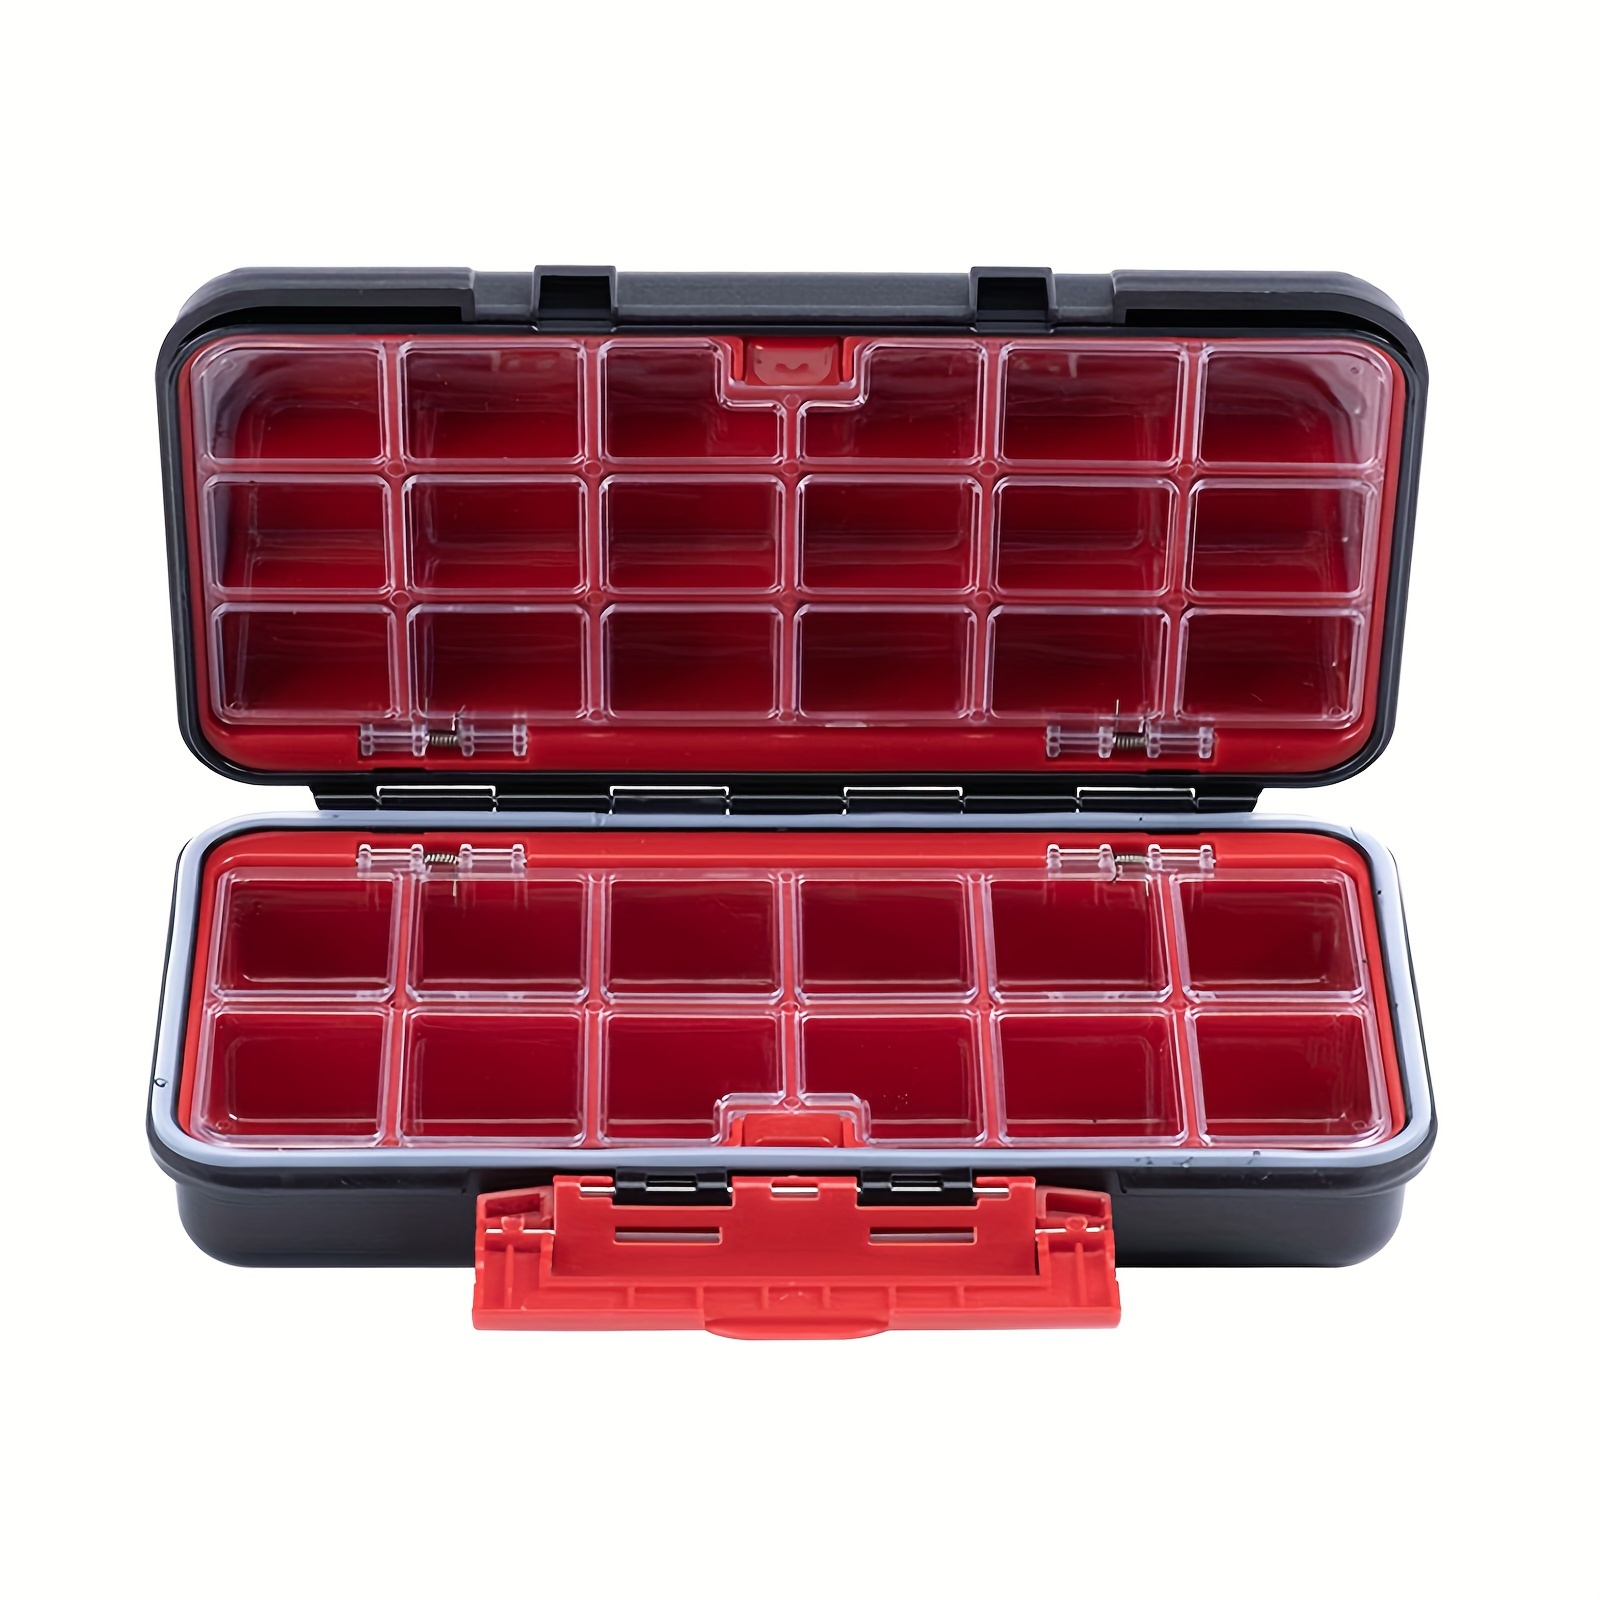 2pcs Fishing Tackle Box Plastic Box with Two Layers Tackle Box Organizer  with Removable Dividers Small Parts Organizer Tackle Box for Fishing Tackle